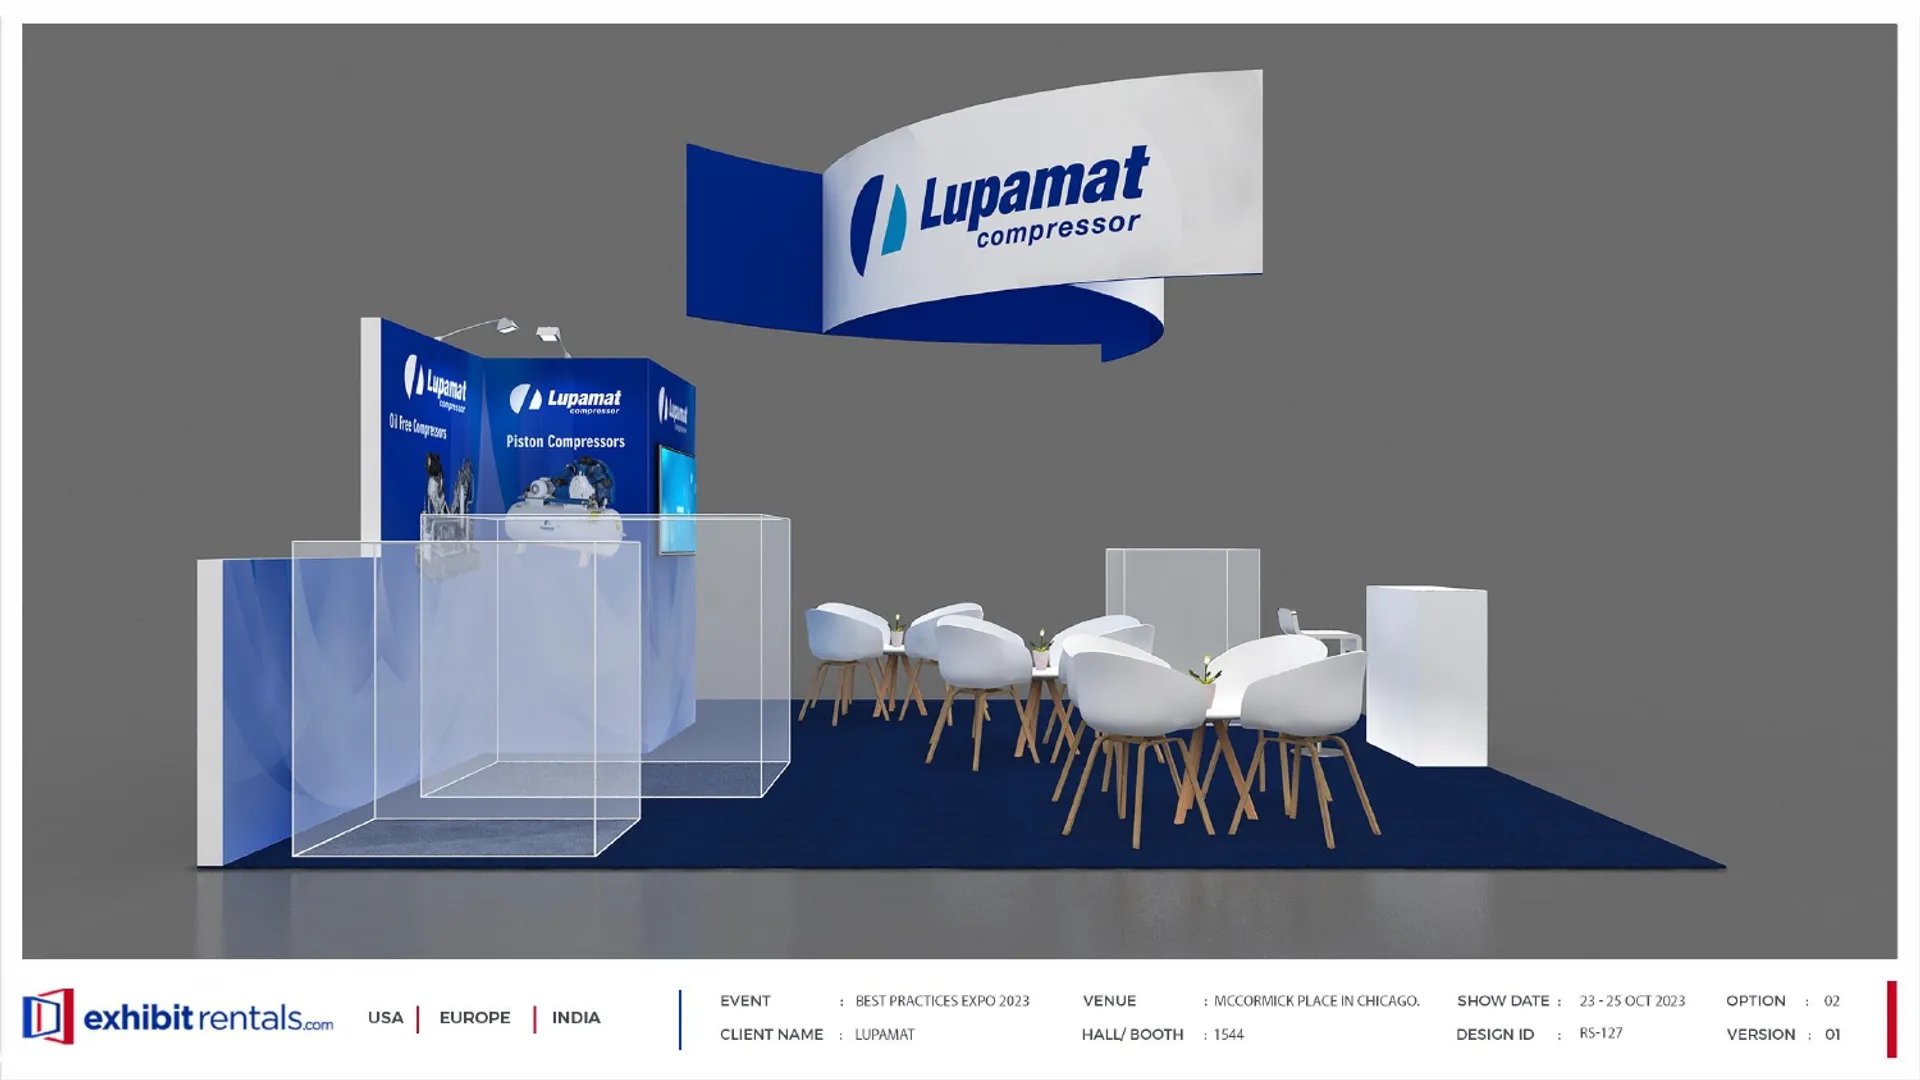 booth-design-projects/Exhibit-Rentals/2024-04-18-40x40-PENINSULA-Project-99/2.1_Lupamat_Best practices expo_ER design proposal-15_page-0001-ejg5n.jpg